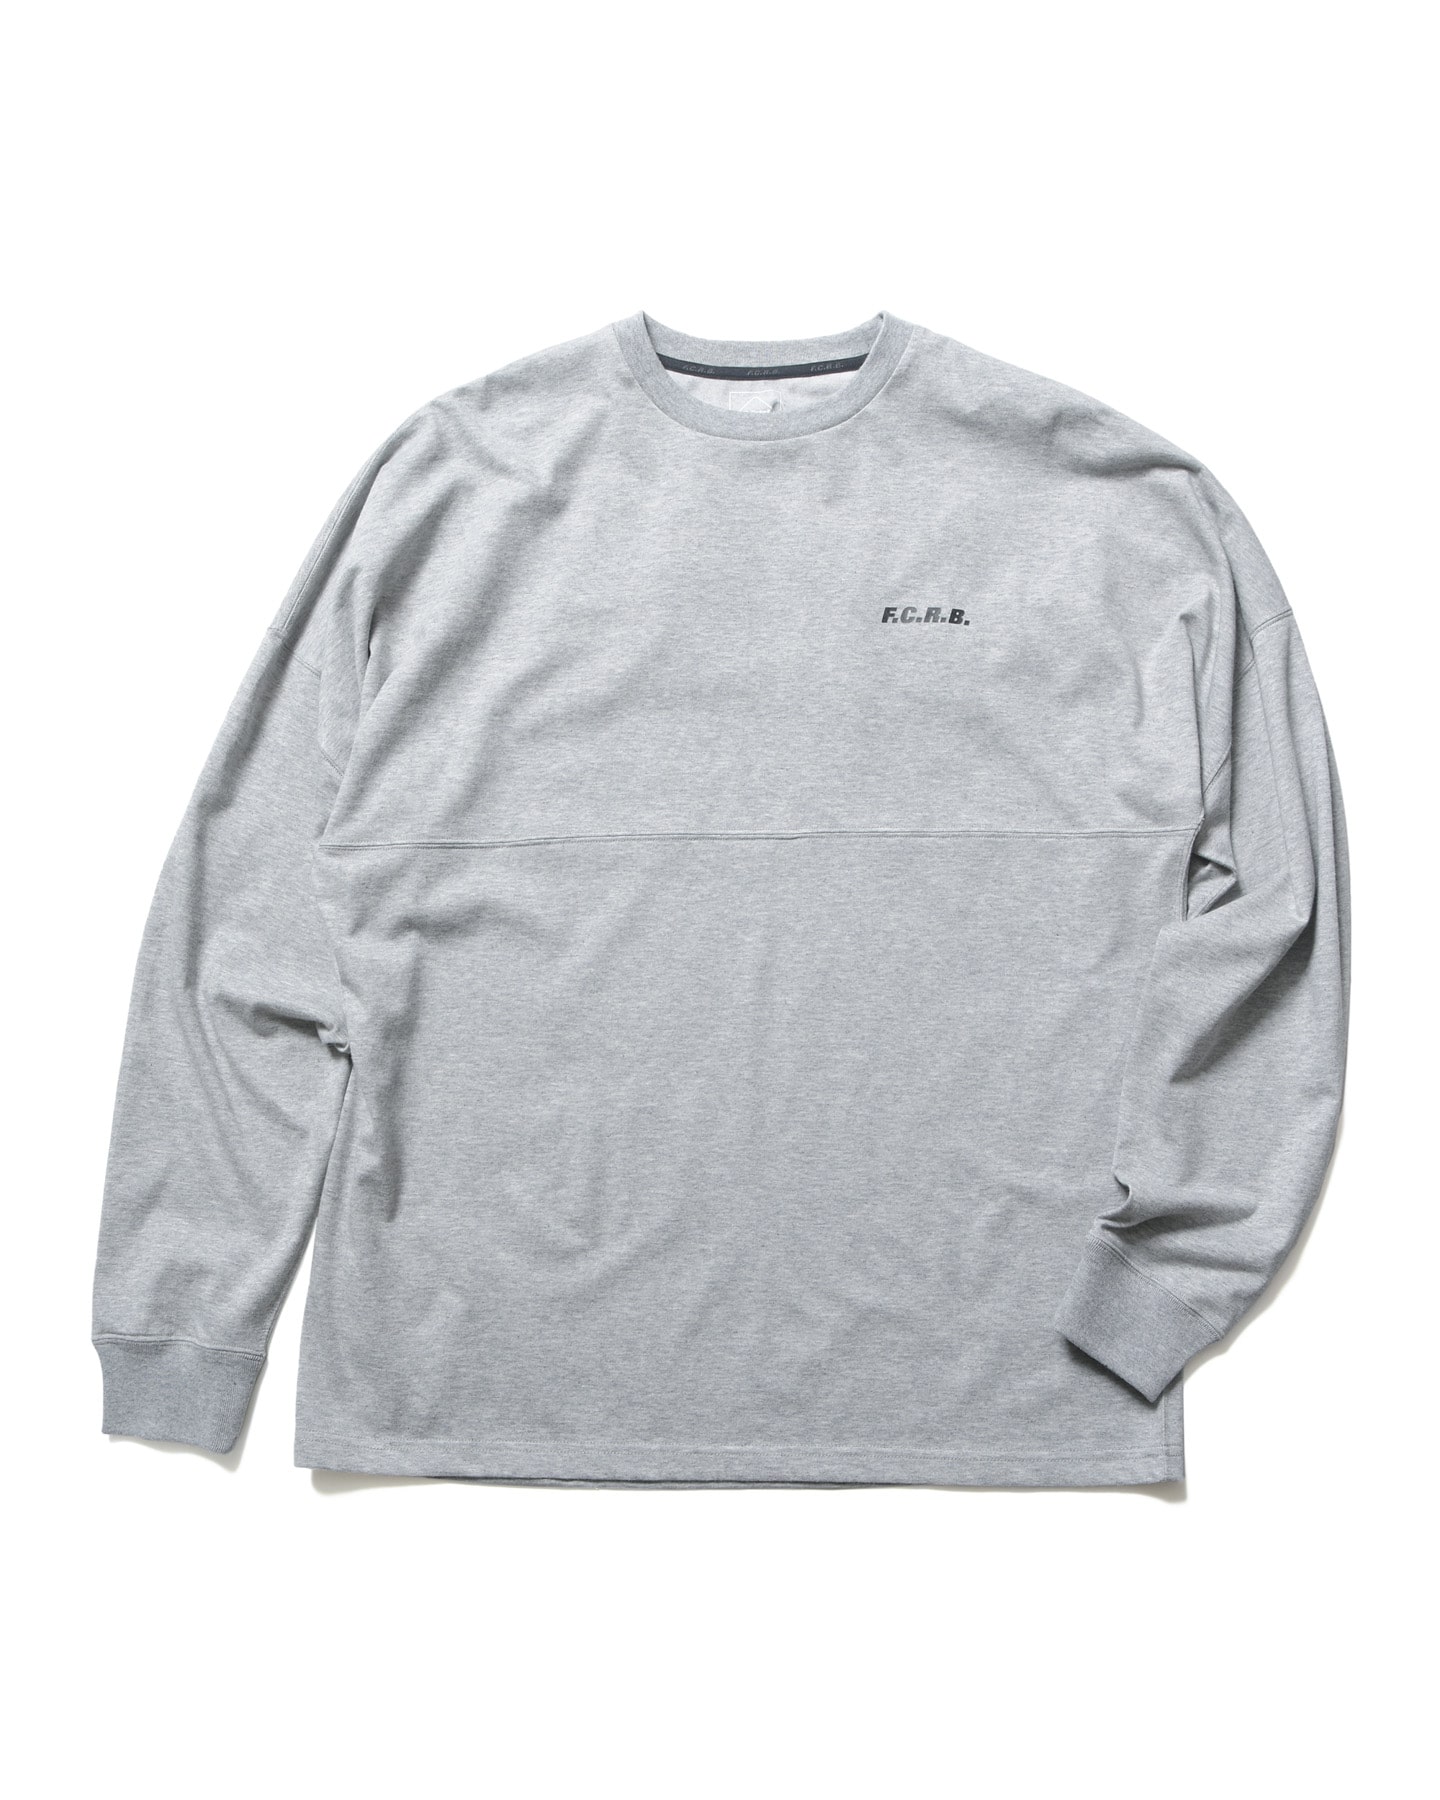 FCRB STAR BIG LOGO L/S TEAM BAGGY TEE - Tシャツ/カットソー(七分/長袖)